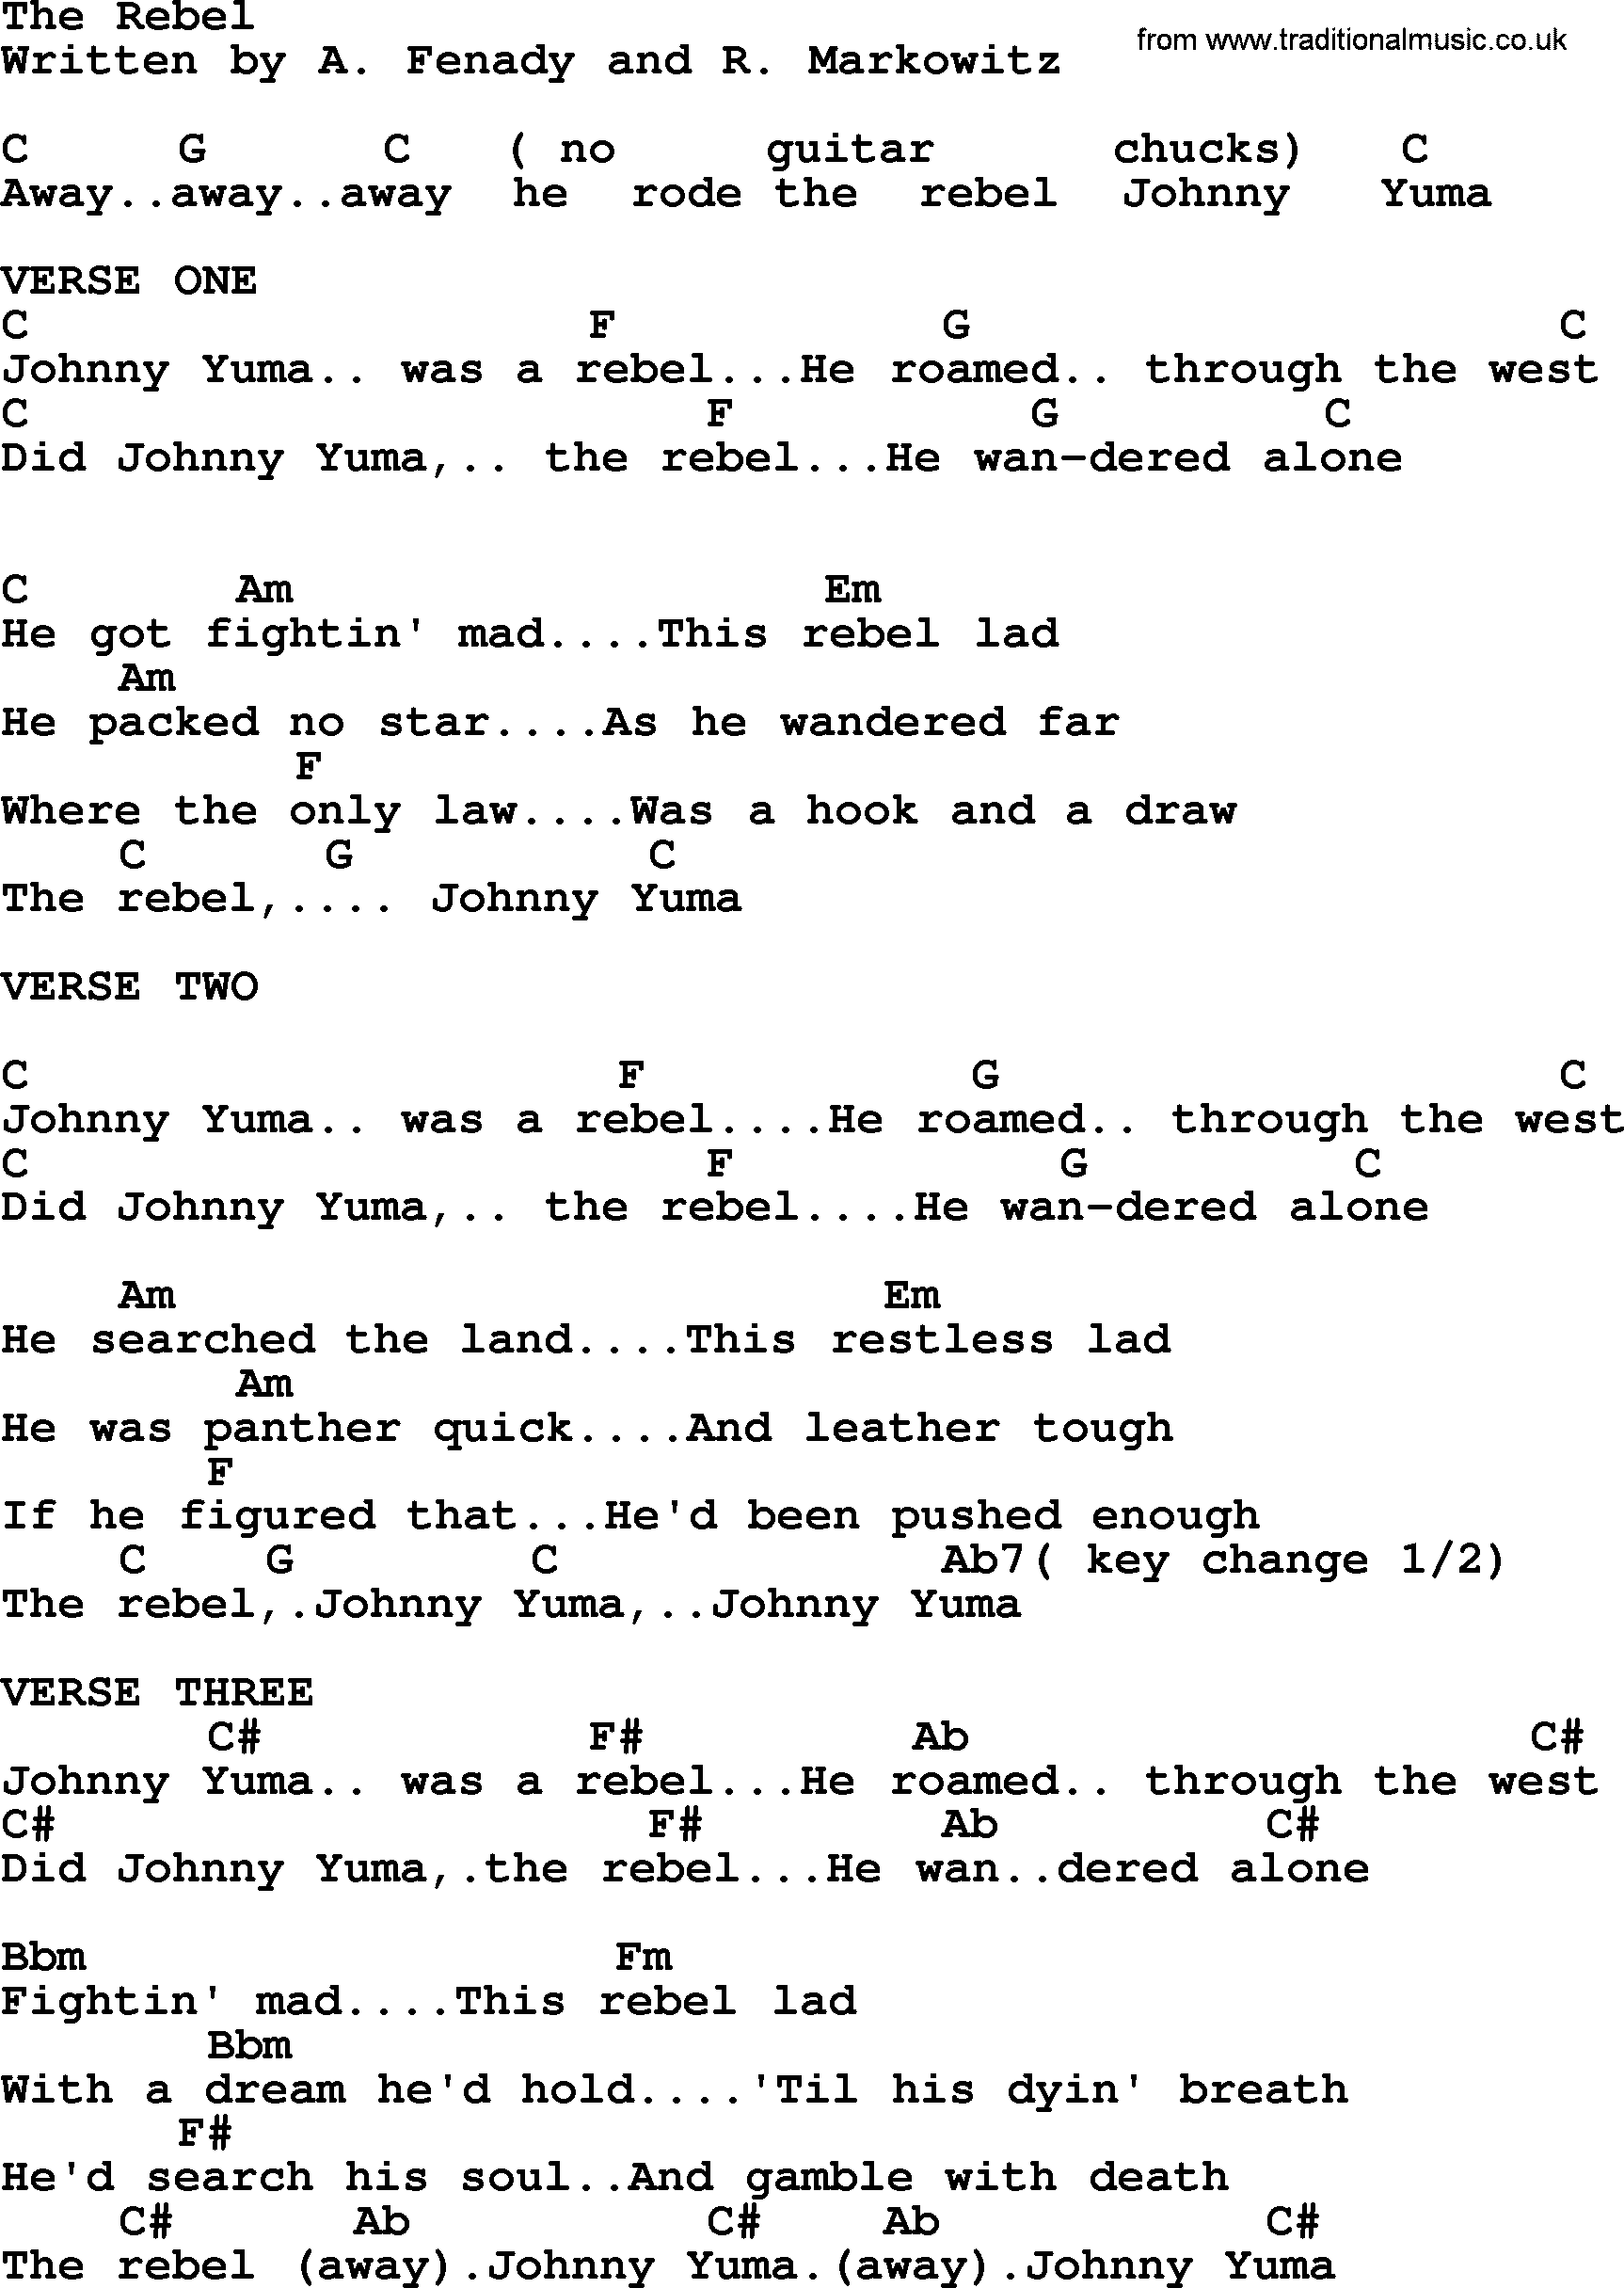 Johnny Cash song The Rebel, lyrics and chords